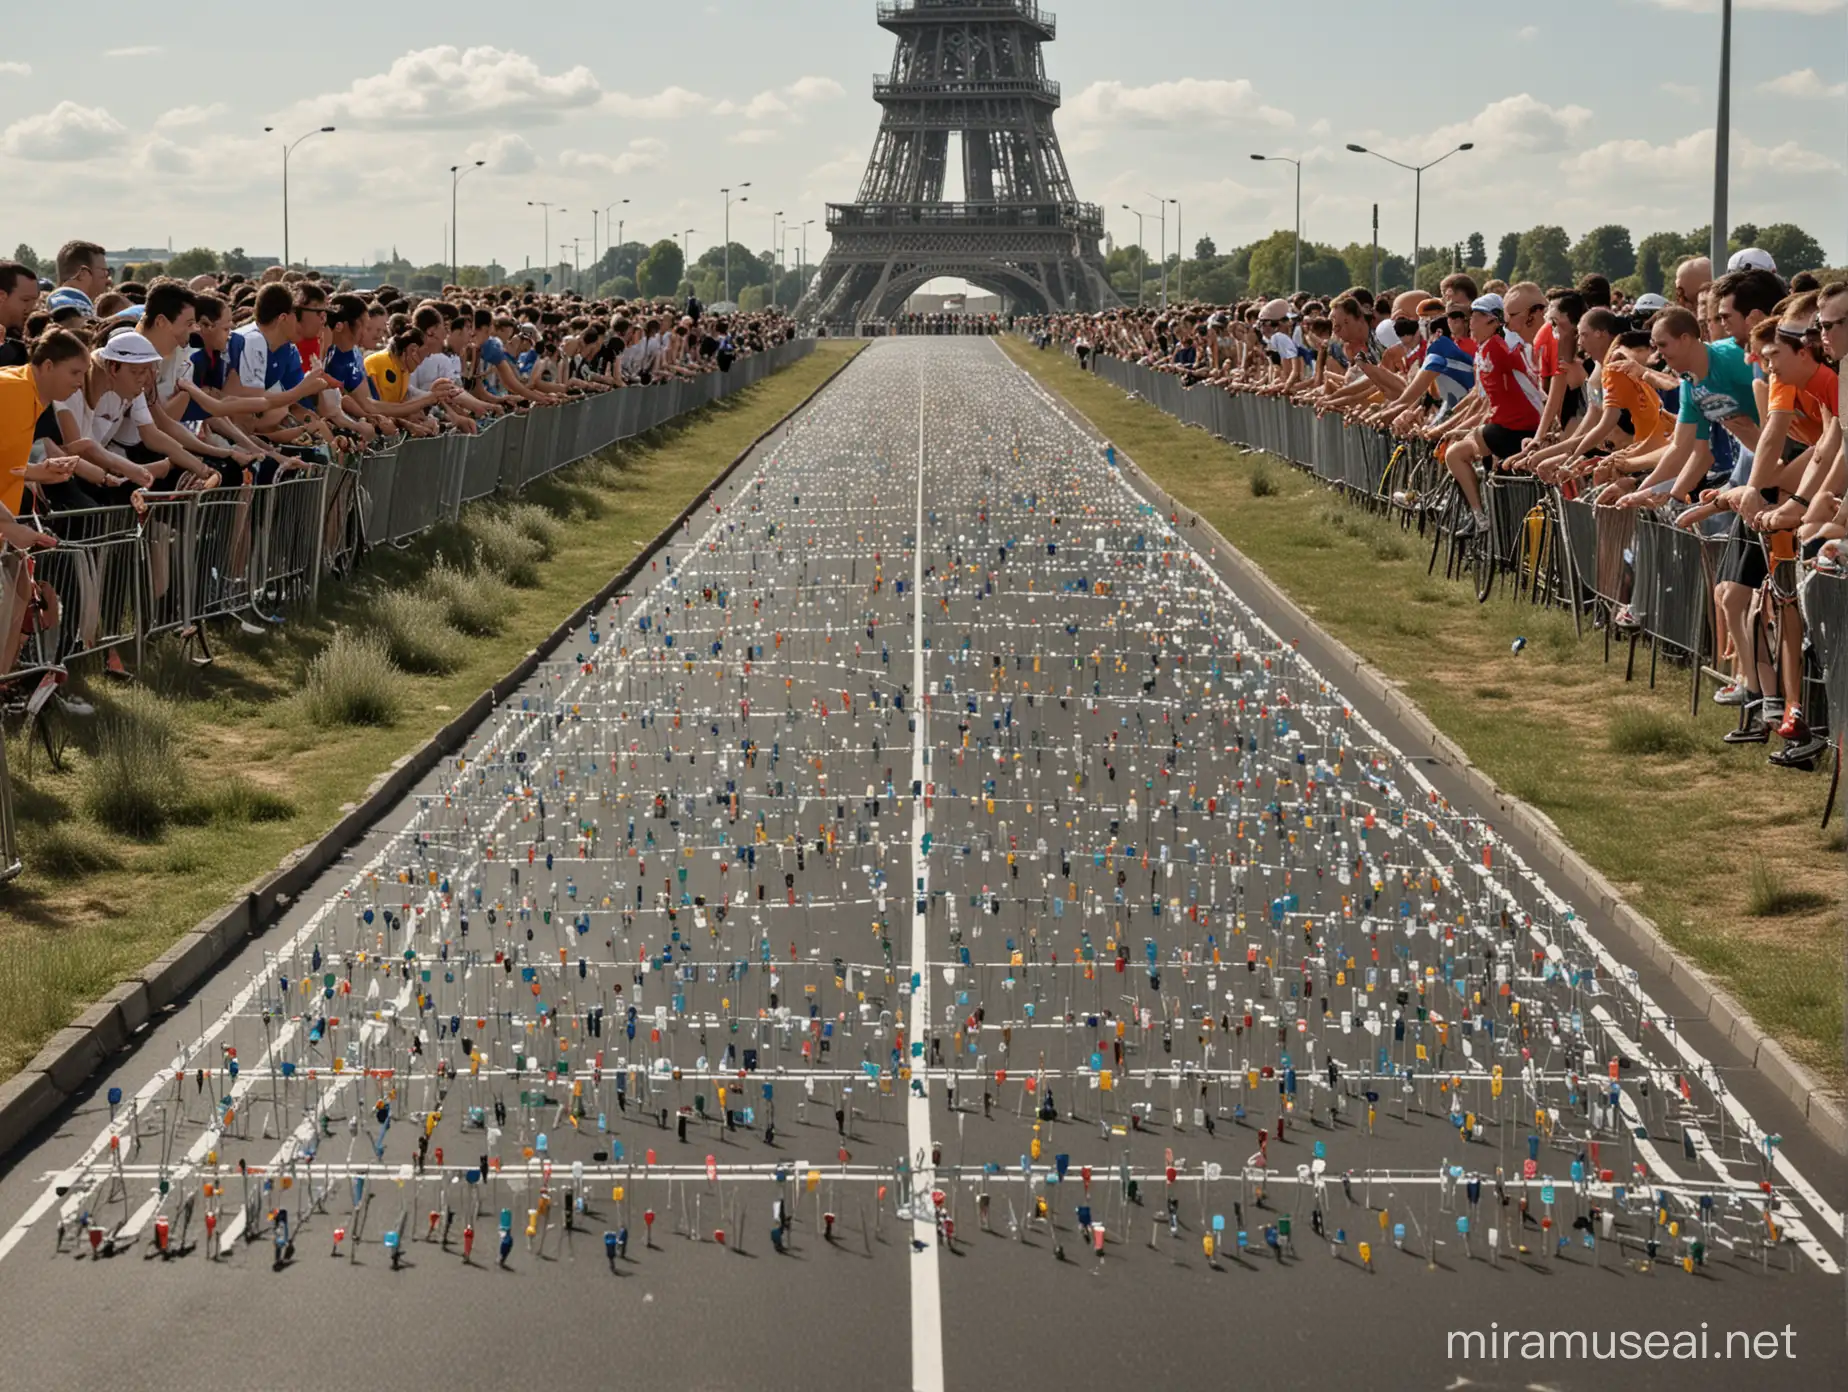 Elite Cyclists Racing towards Tower of Safety Pins